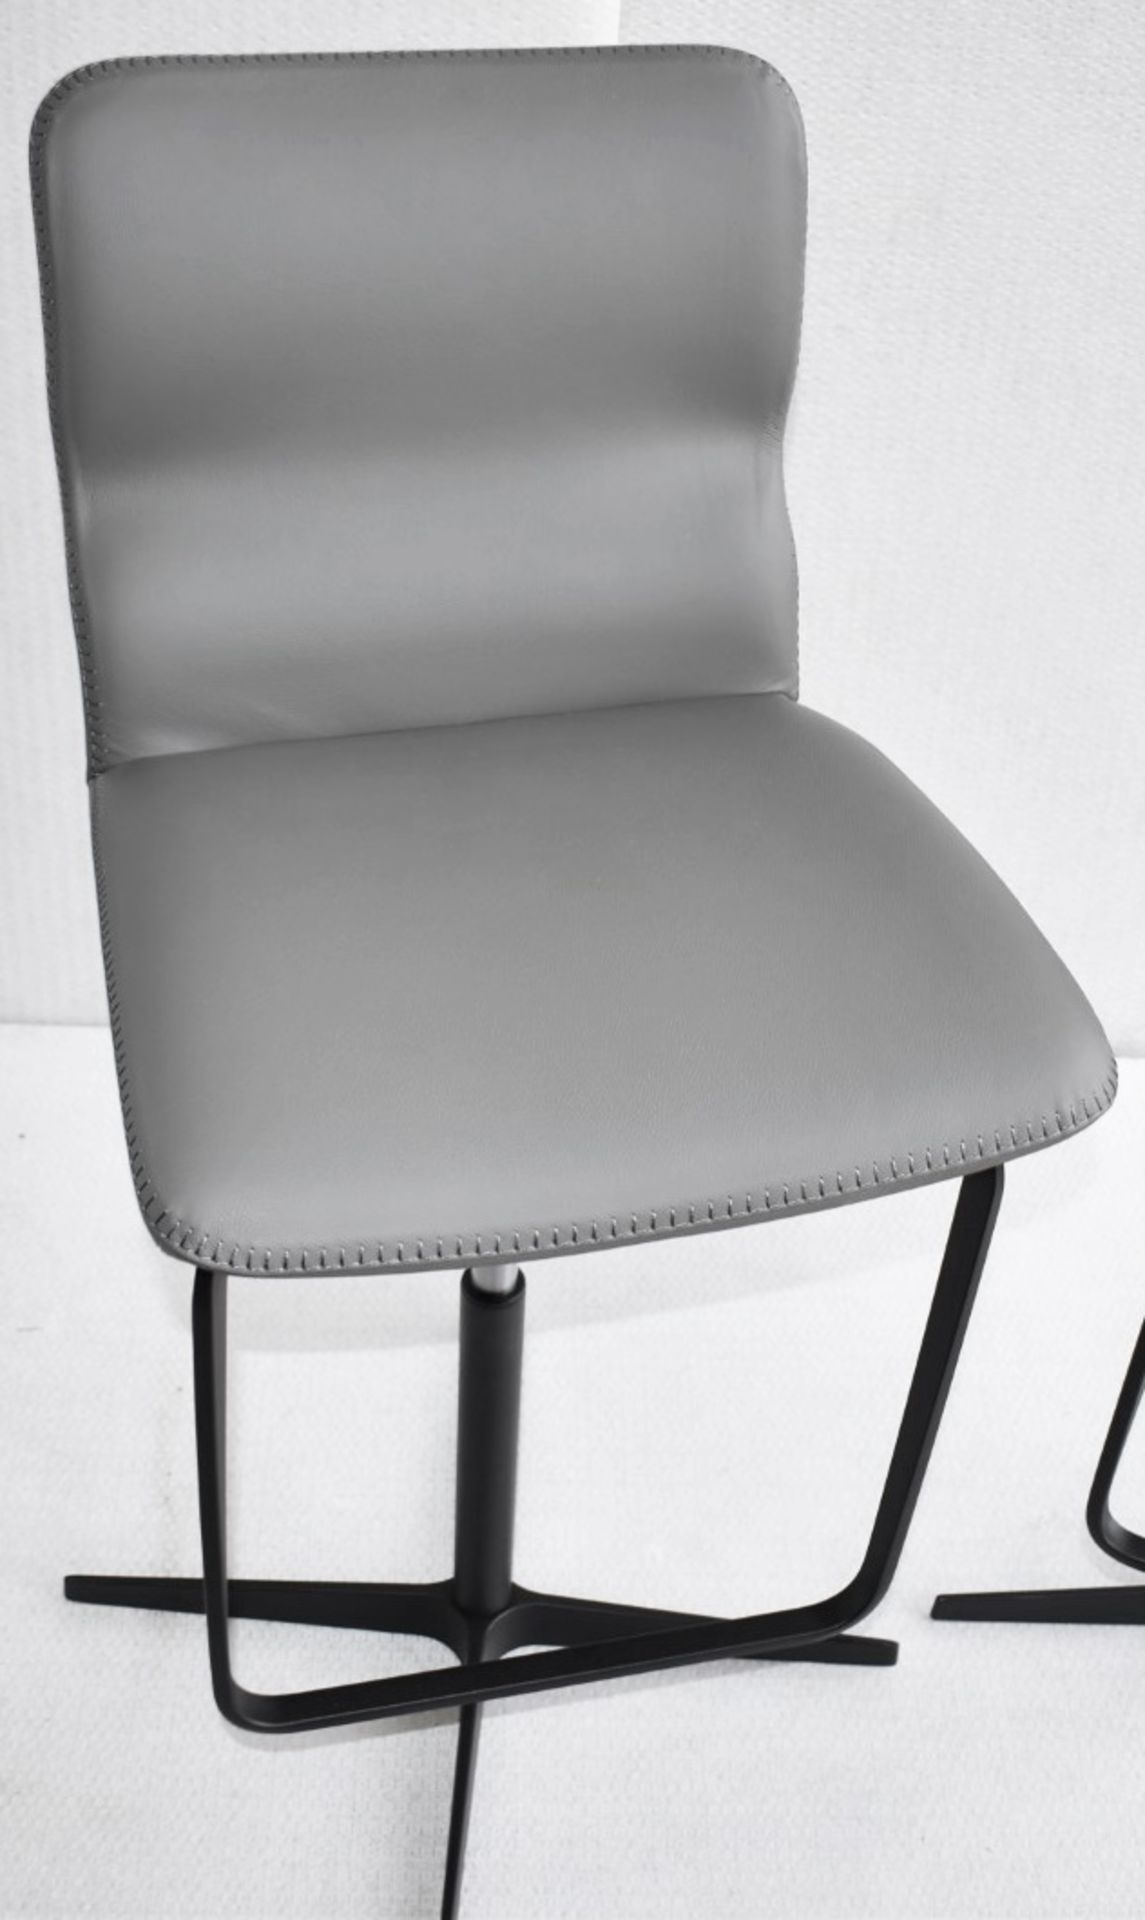 A Pair of CATTELAN ITALIA 'Victor X' Designer Leather Upholstered Barstools - Original Price £1,798 - Image 6 of 12